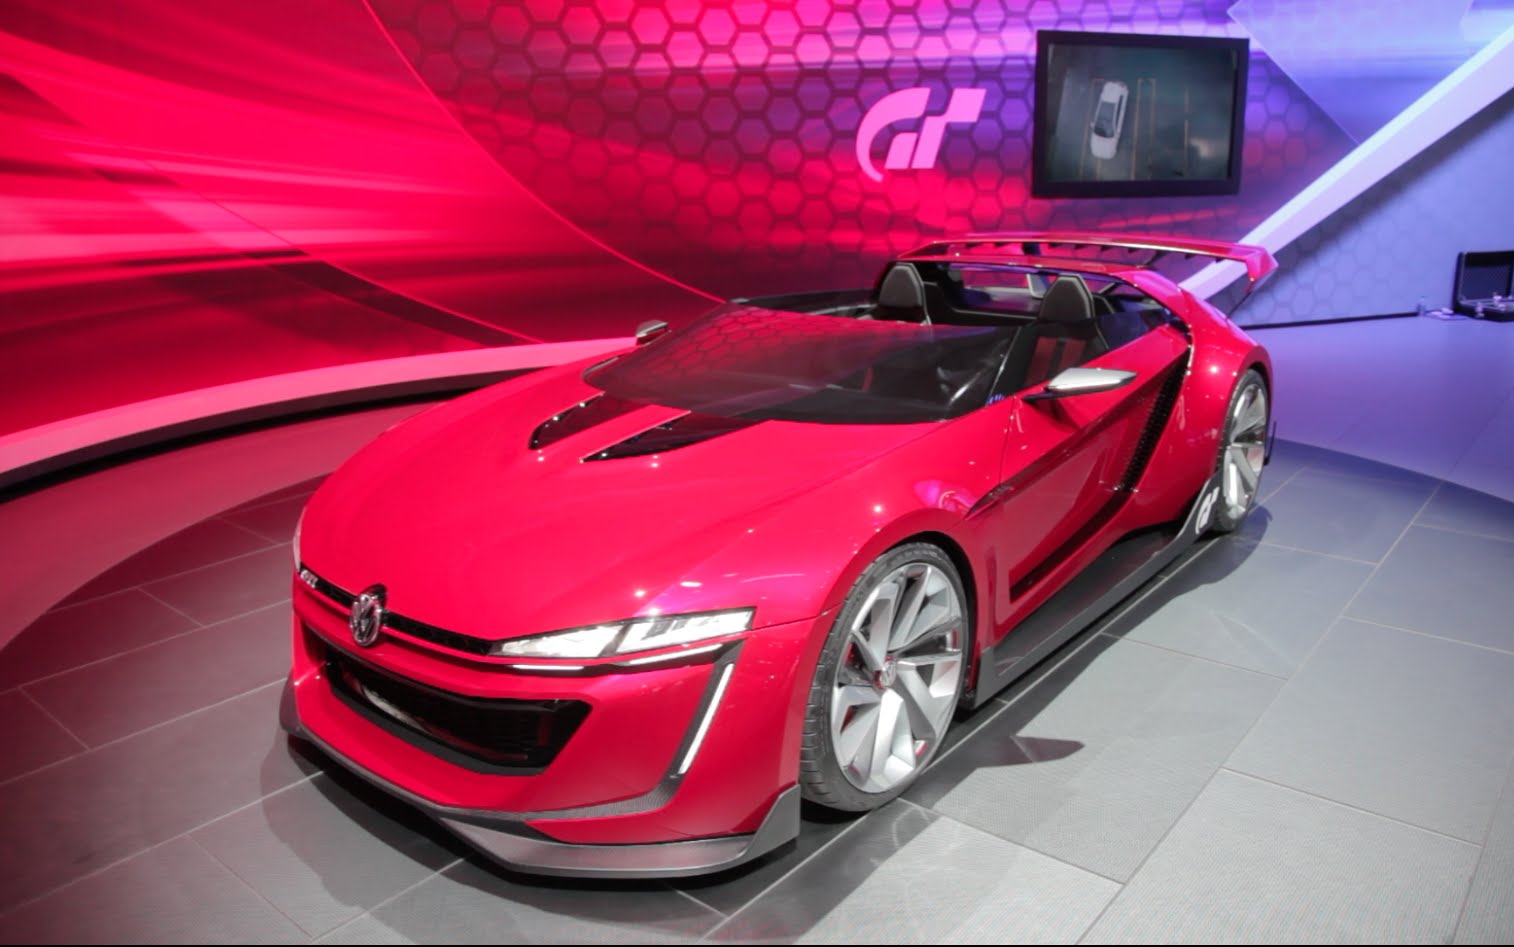 Concept Car from VW Looks Futuristic and Out of a Game